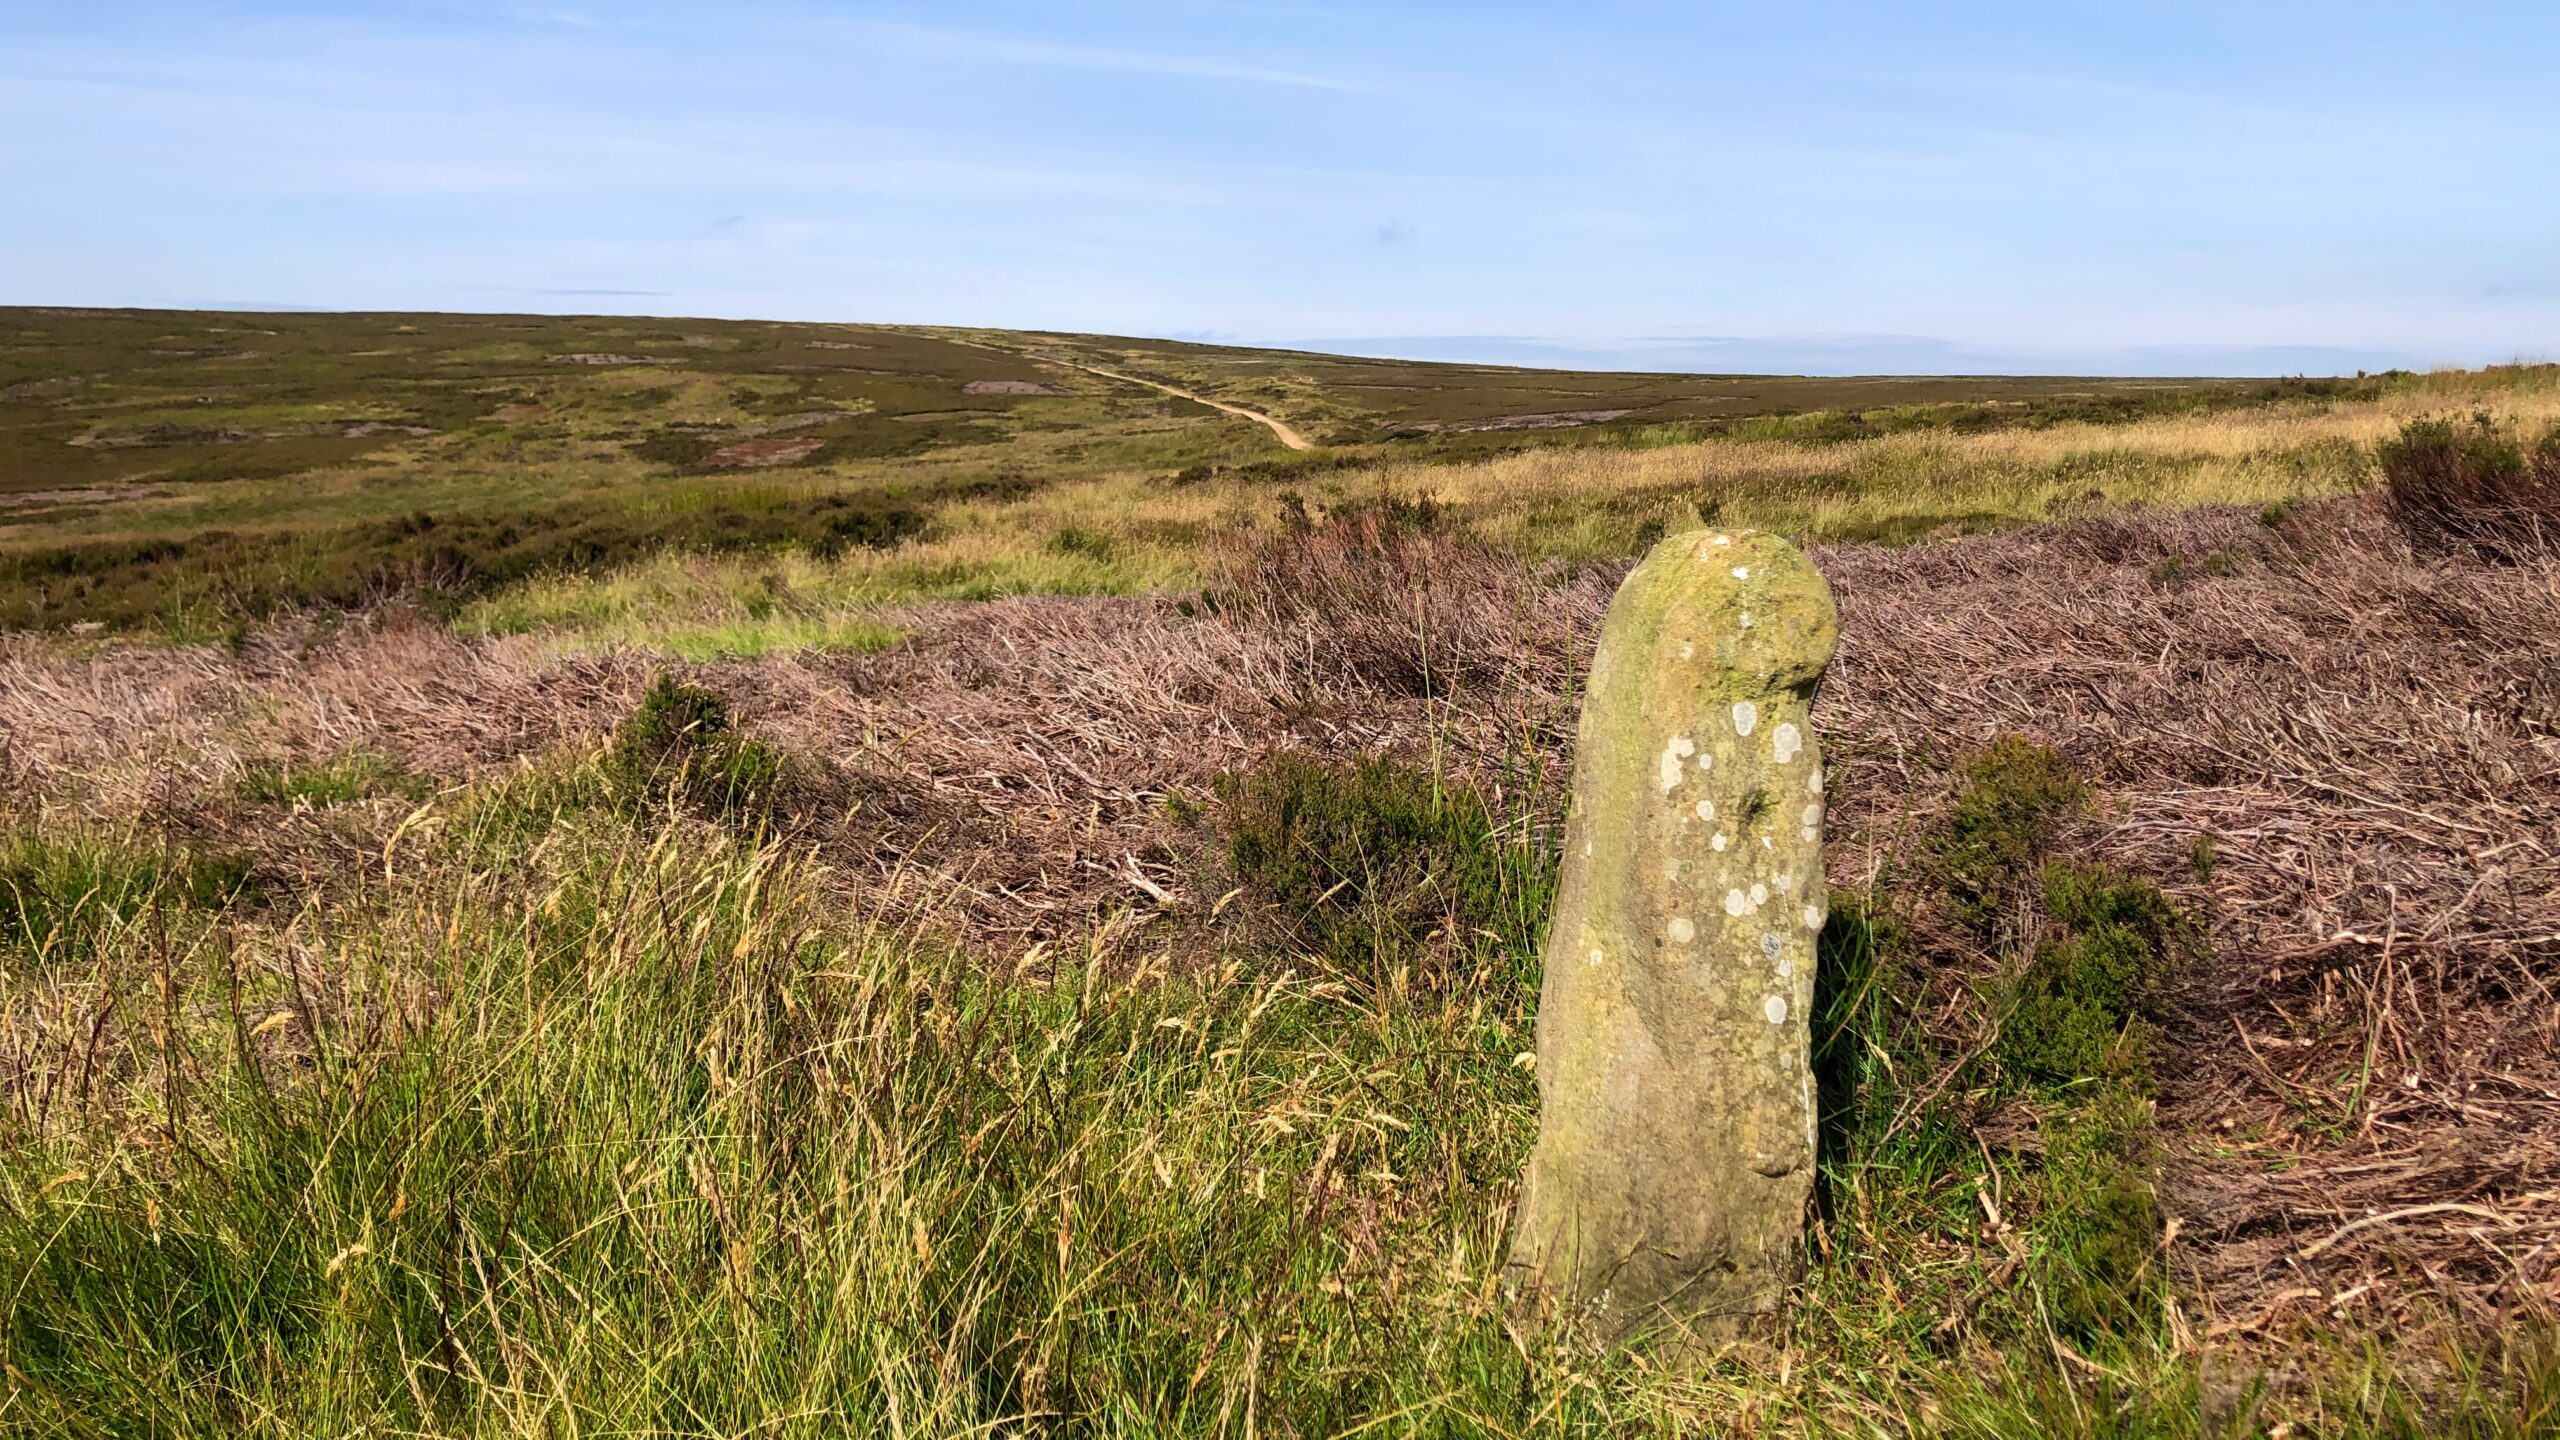 From Battersby to Farndale: A Stone that Guides the Way